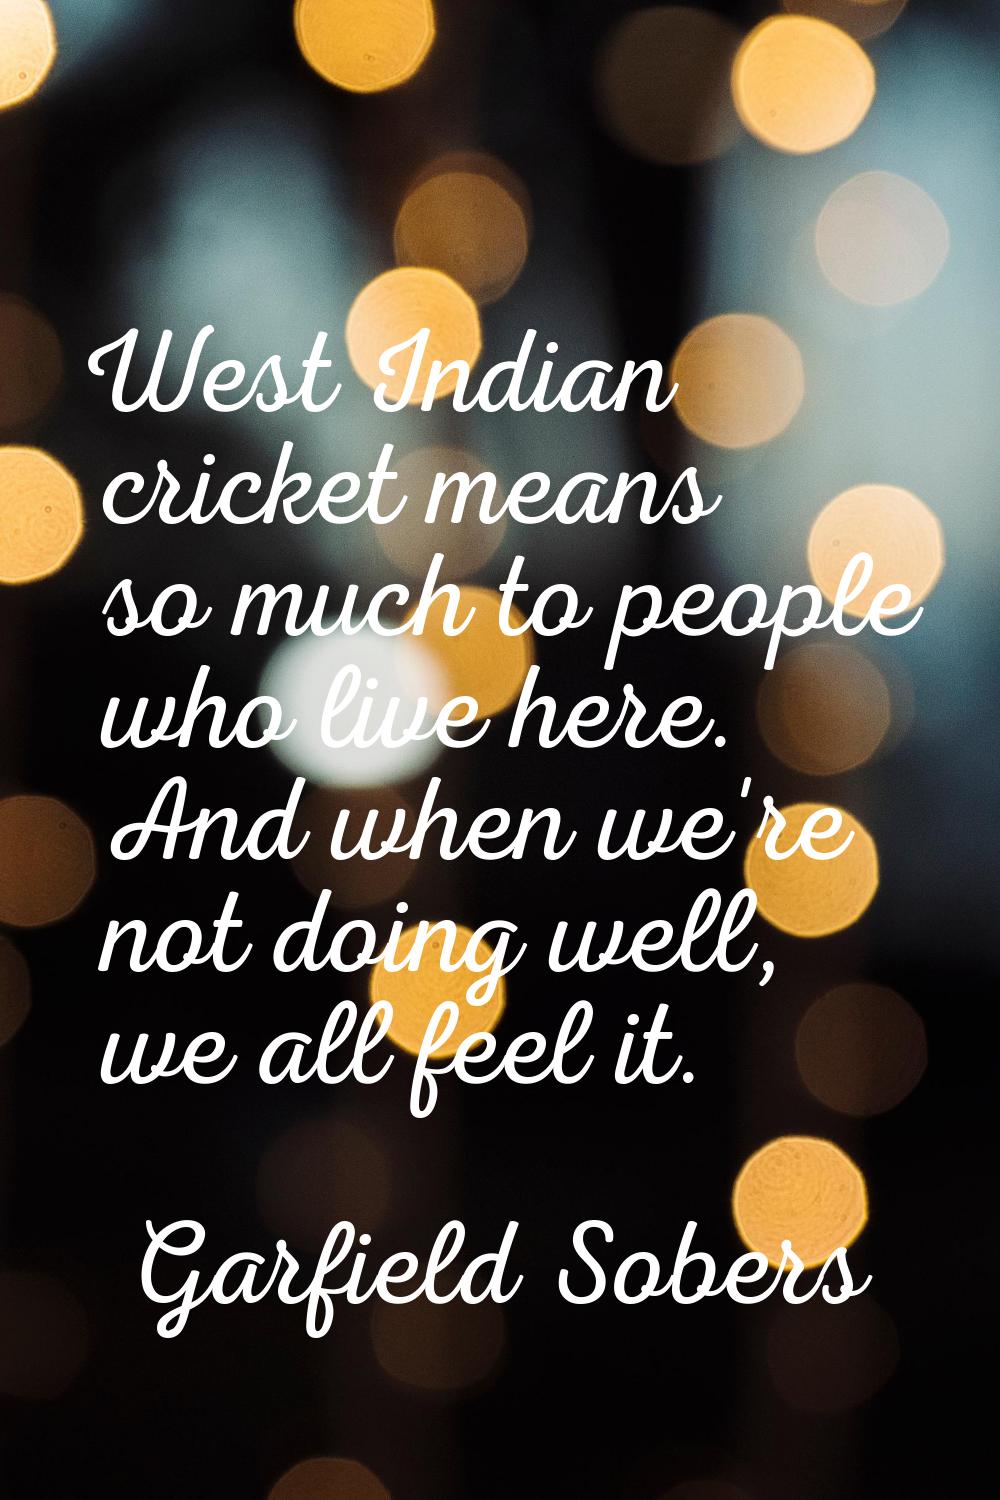 West Indian cricket means so much to people who live here. And when we're not doing well, we all fe